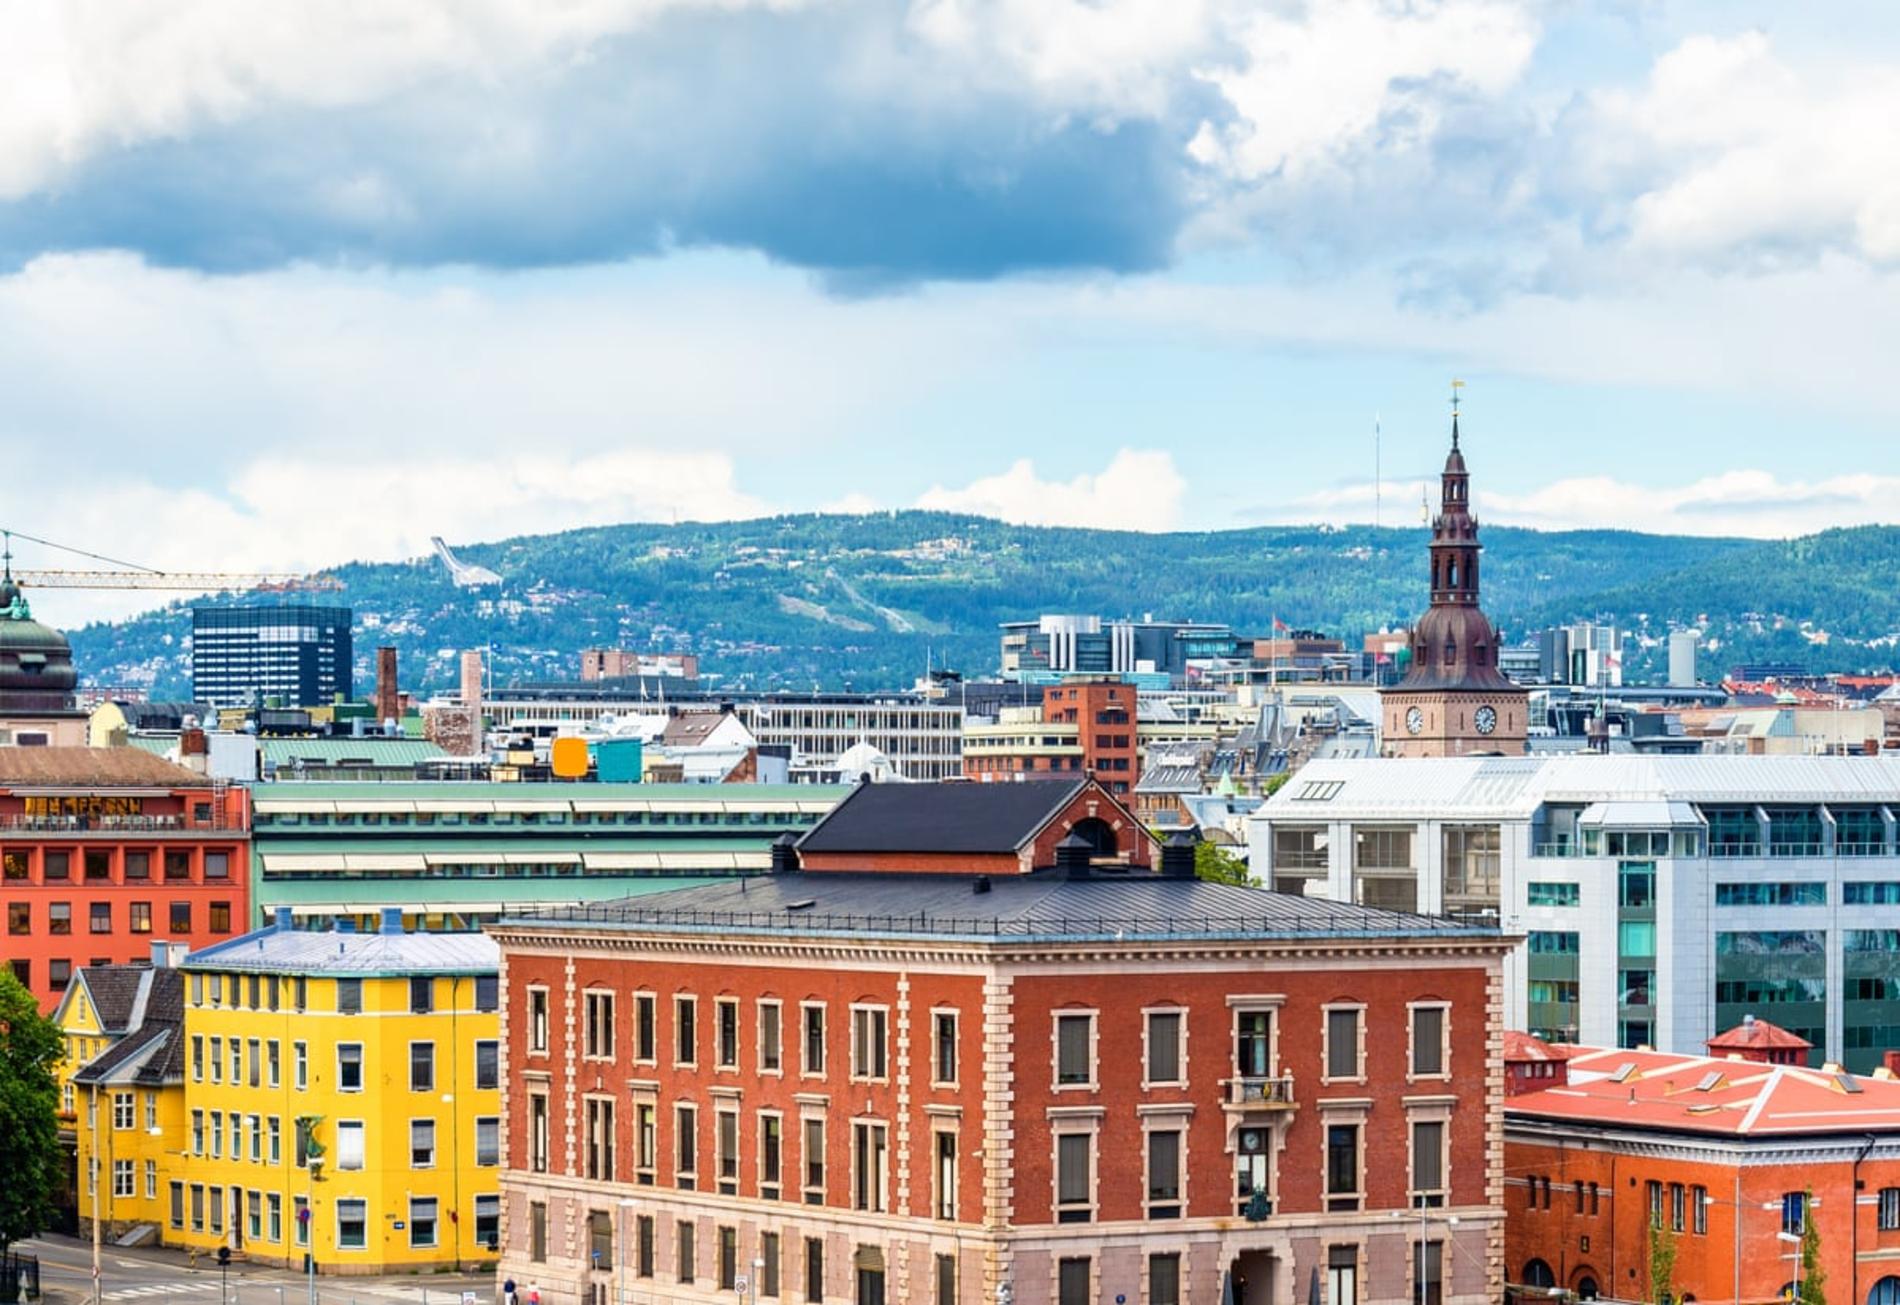 Oslo, the capital of Norway, sits on the country's southern coast.